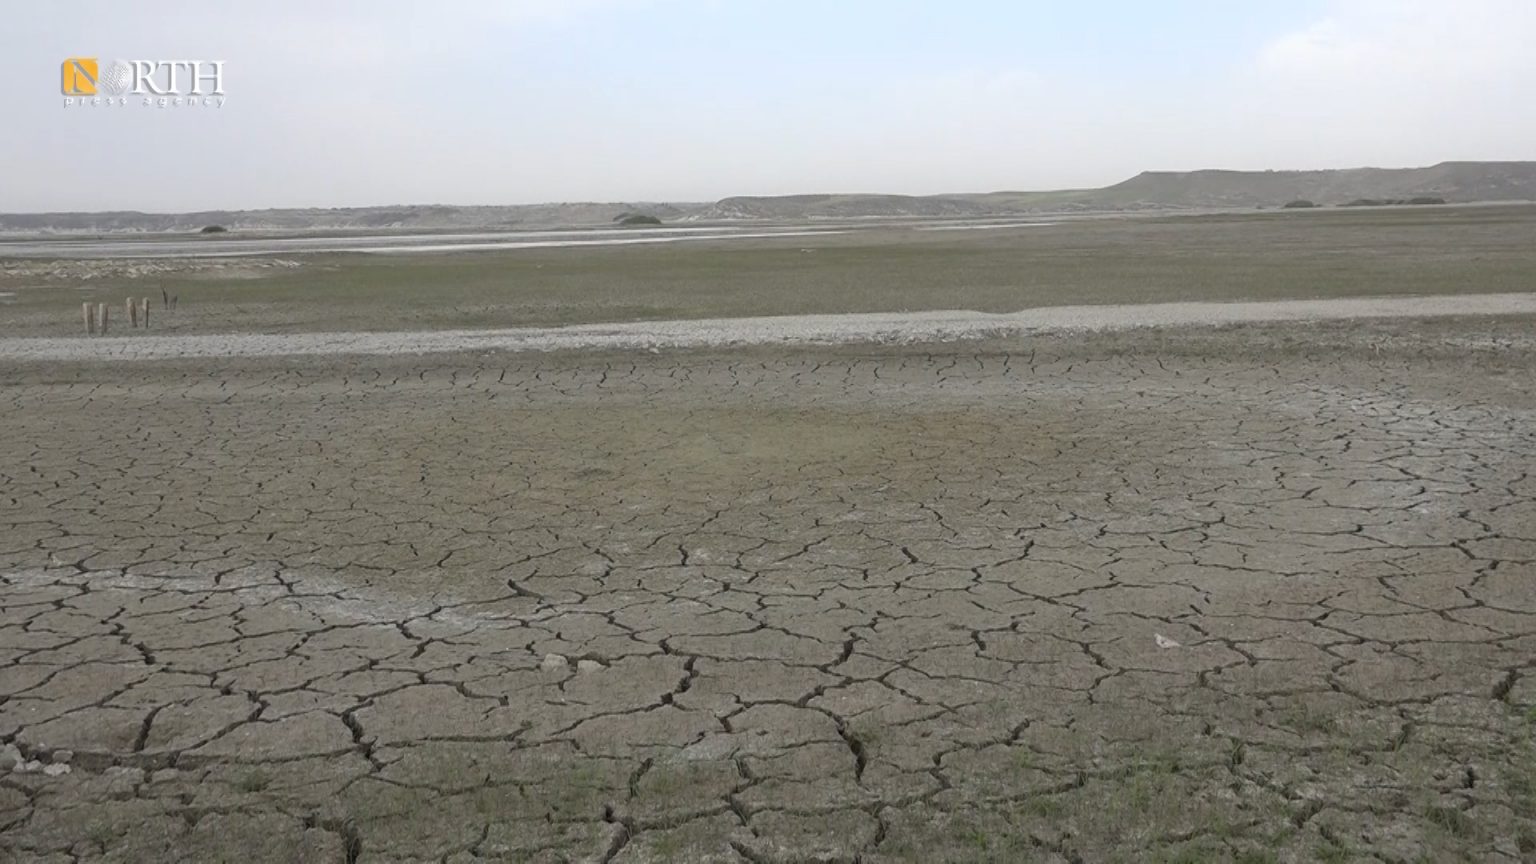 Euphrates River drought damages crops in Syria's Kobani North press